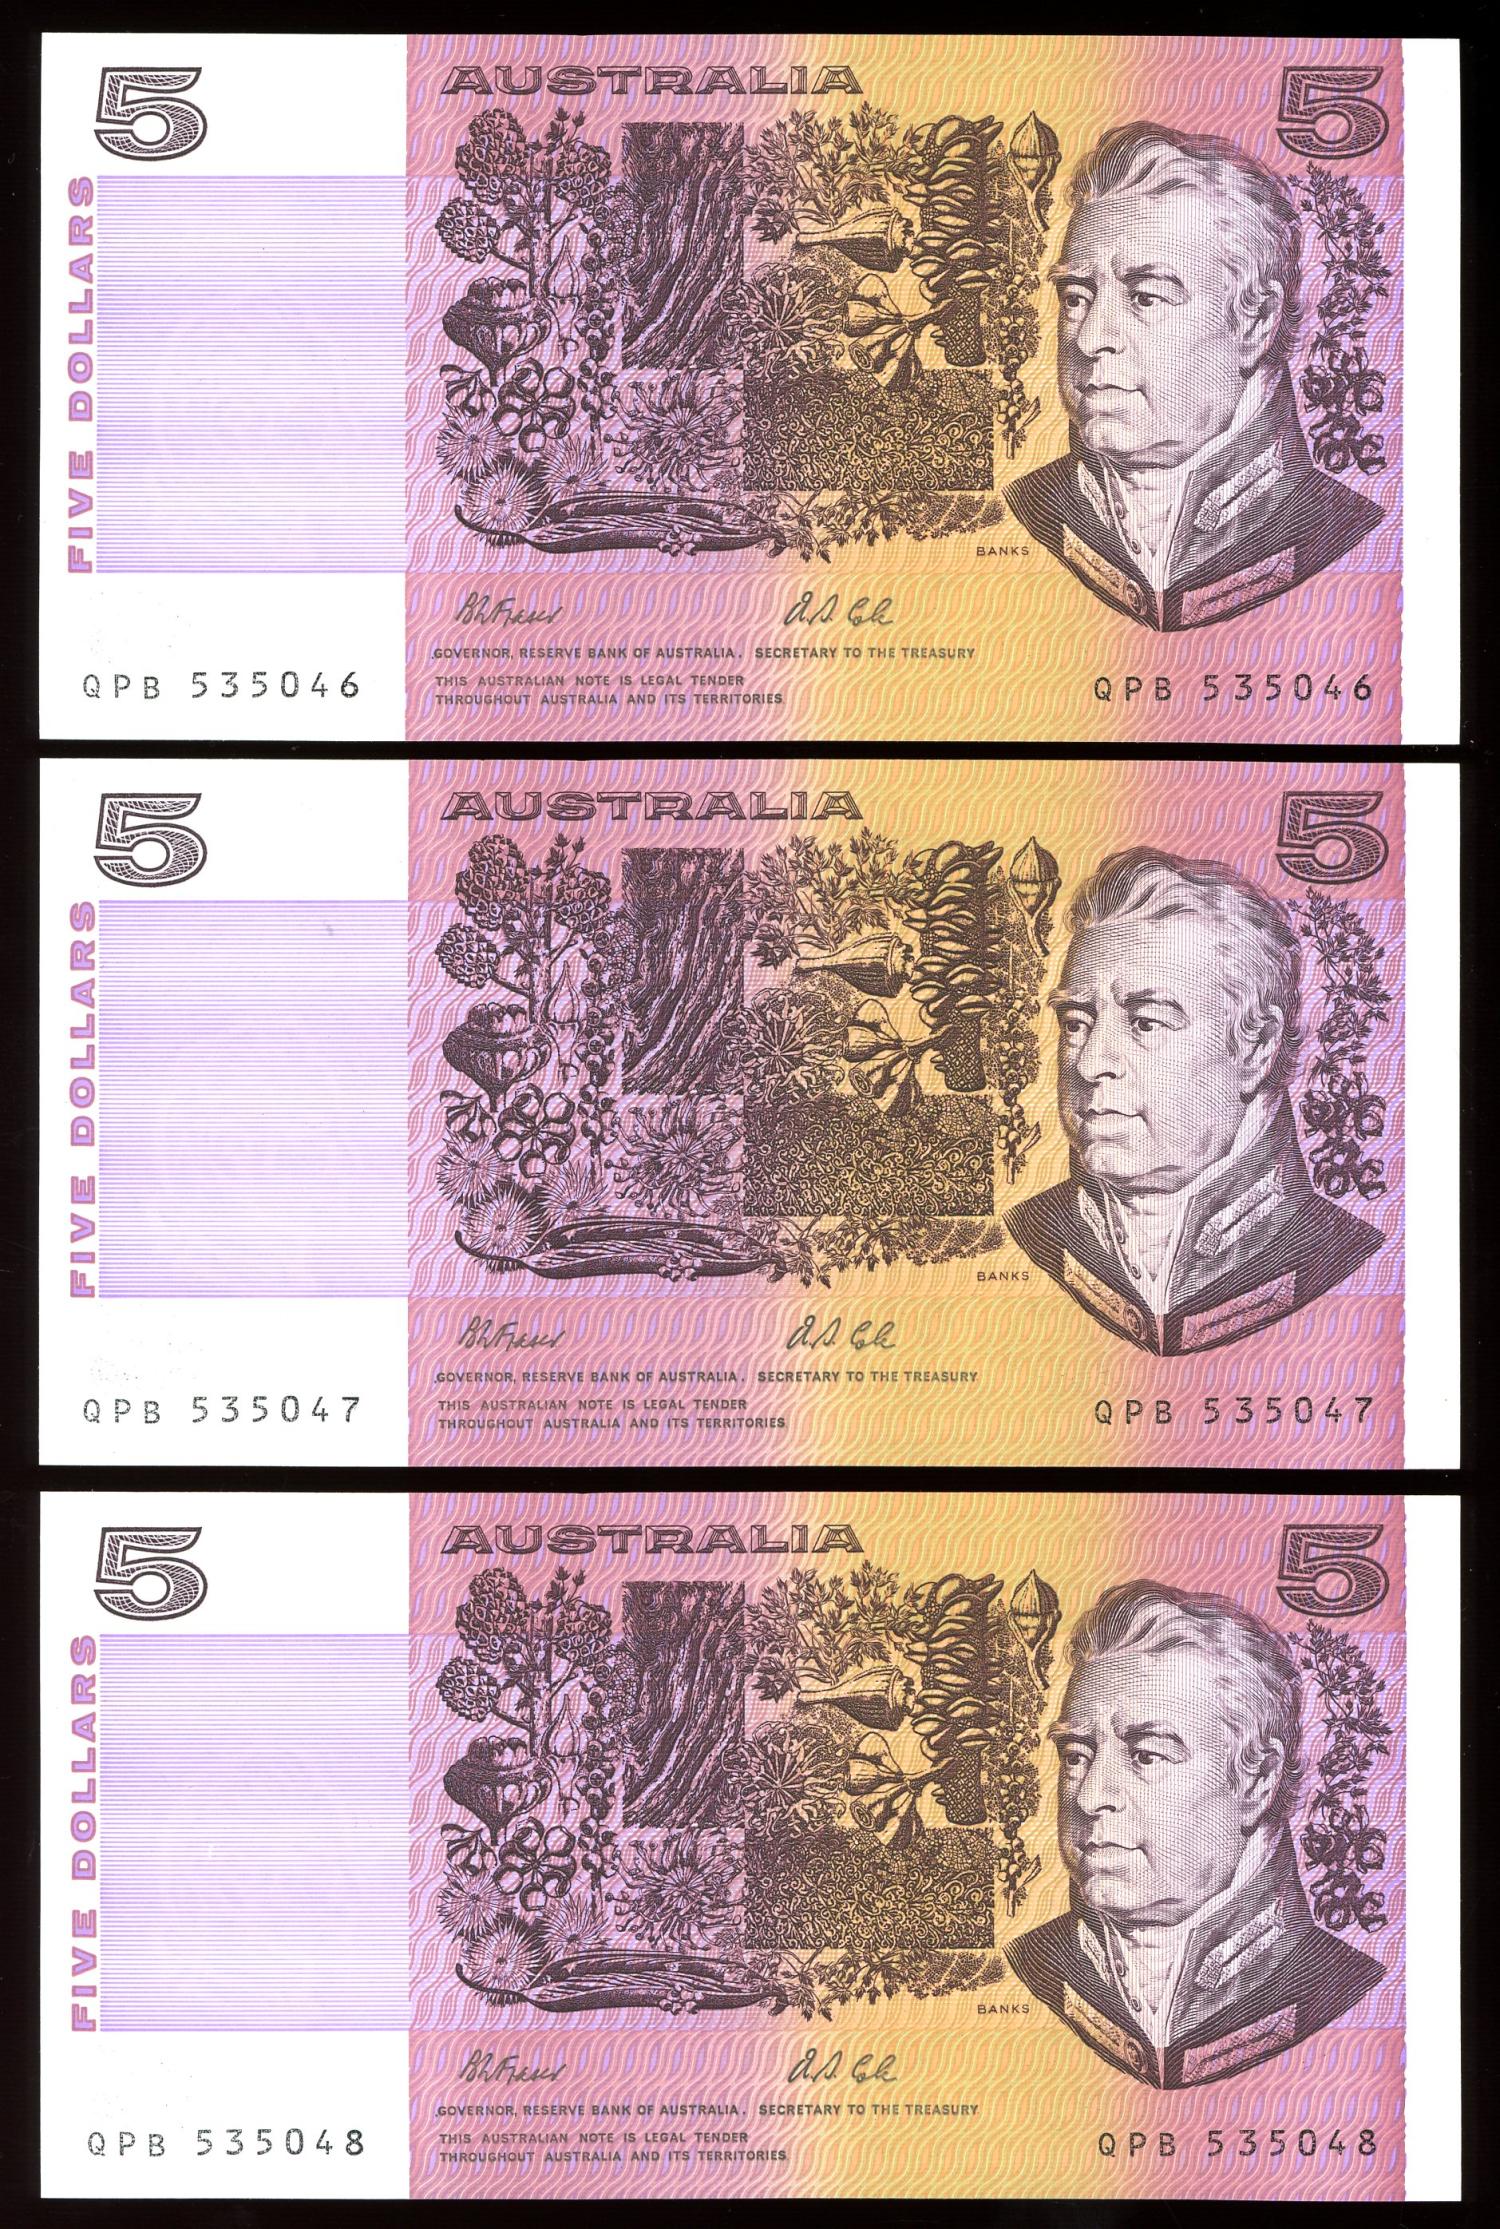 Thumbnail for 1991 $5 Trio Fraser-Cole QPB 535046-048 UNC